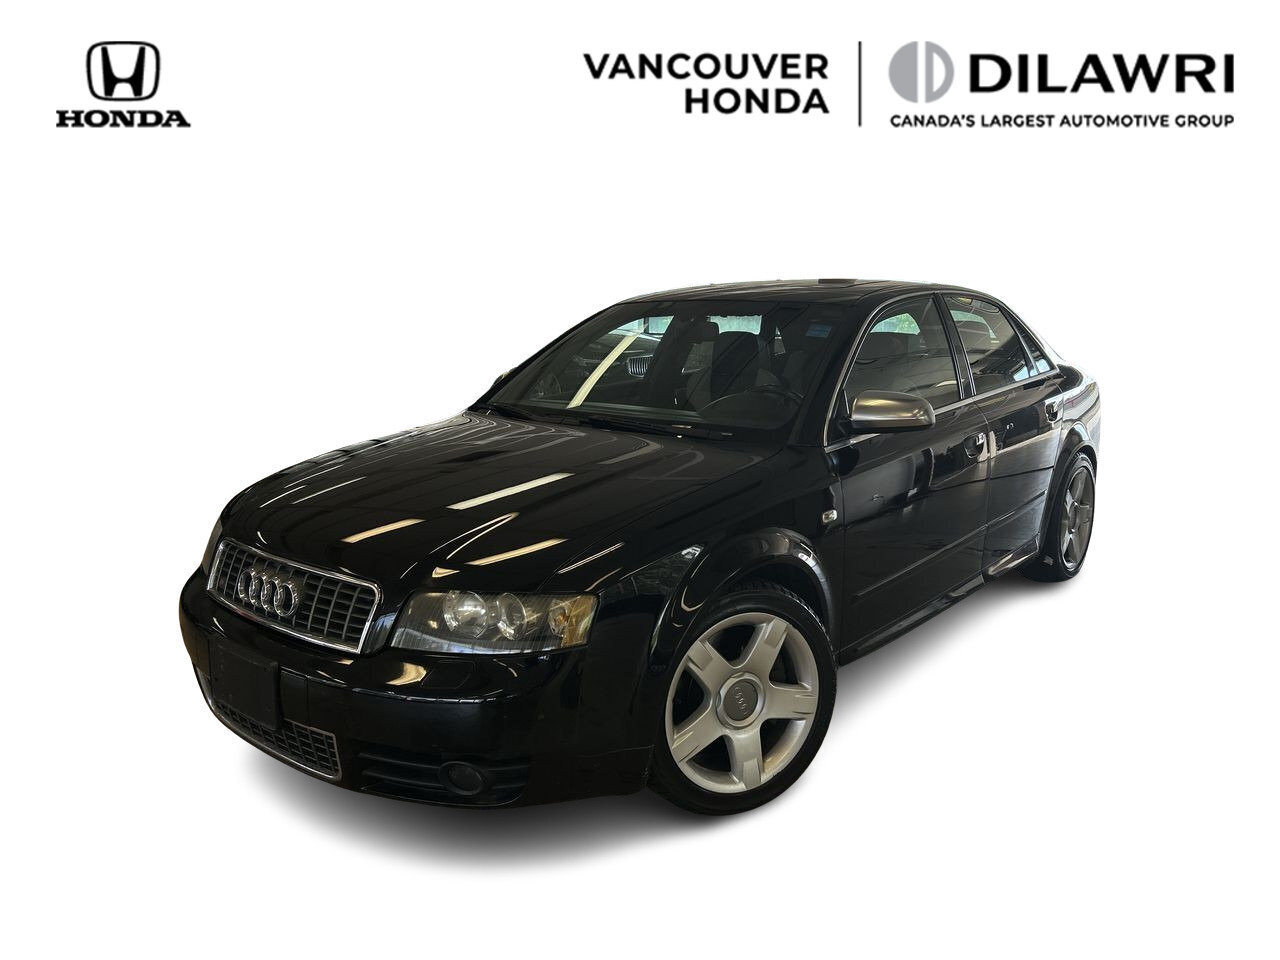 2004 Audi S4 Sdn 6sp man Qtro | Dilawri Pre-Owned Event ON Now!